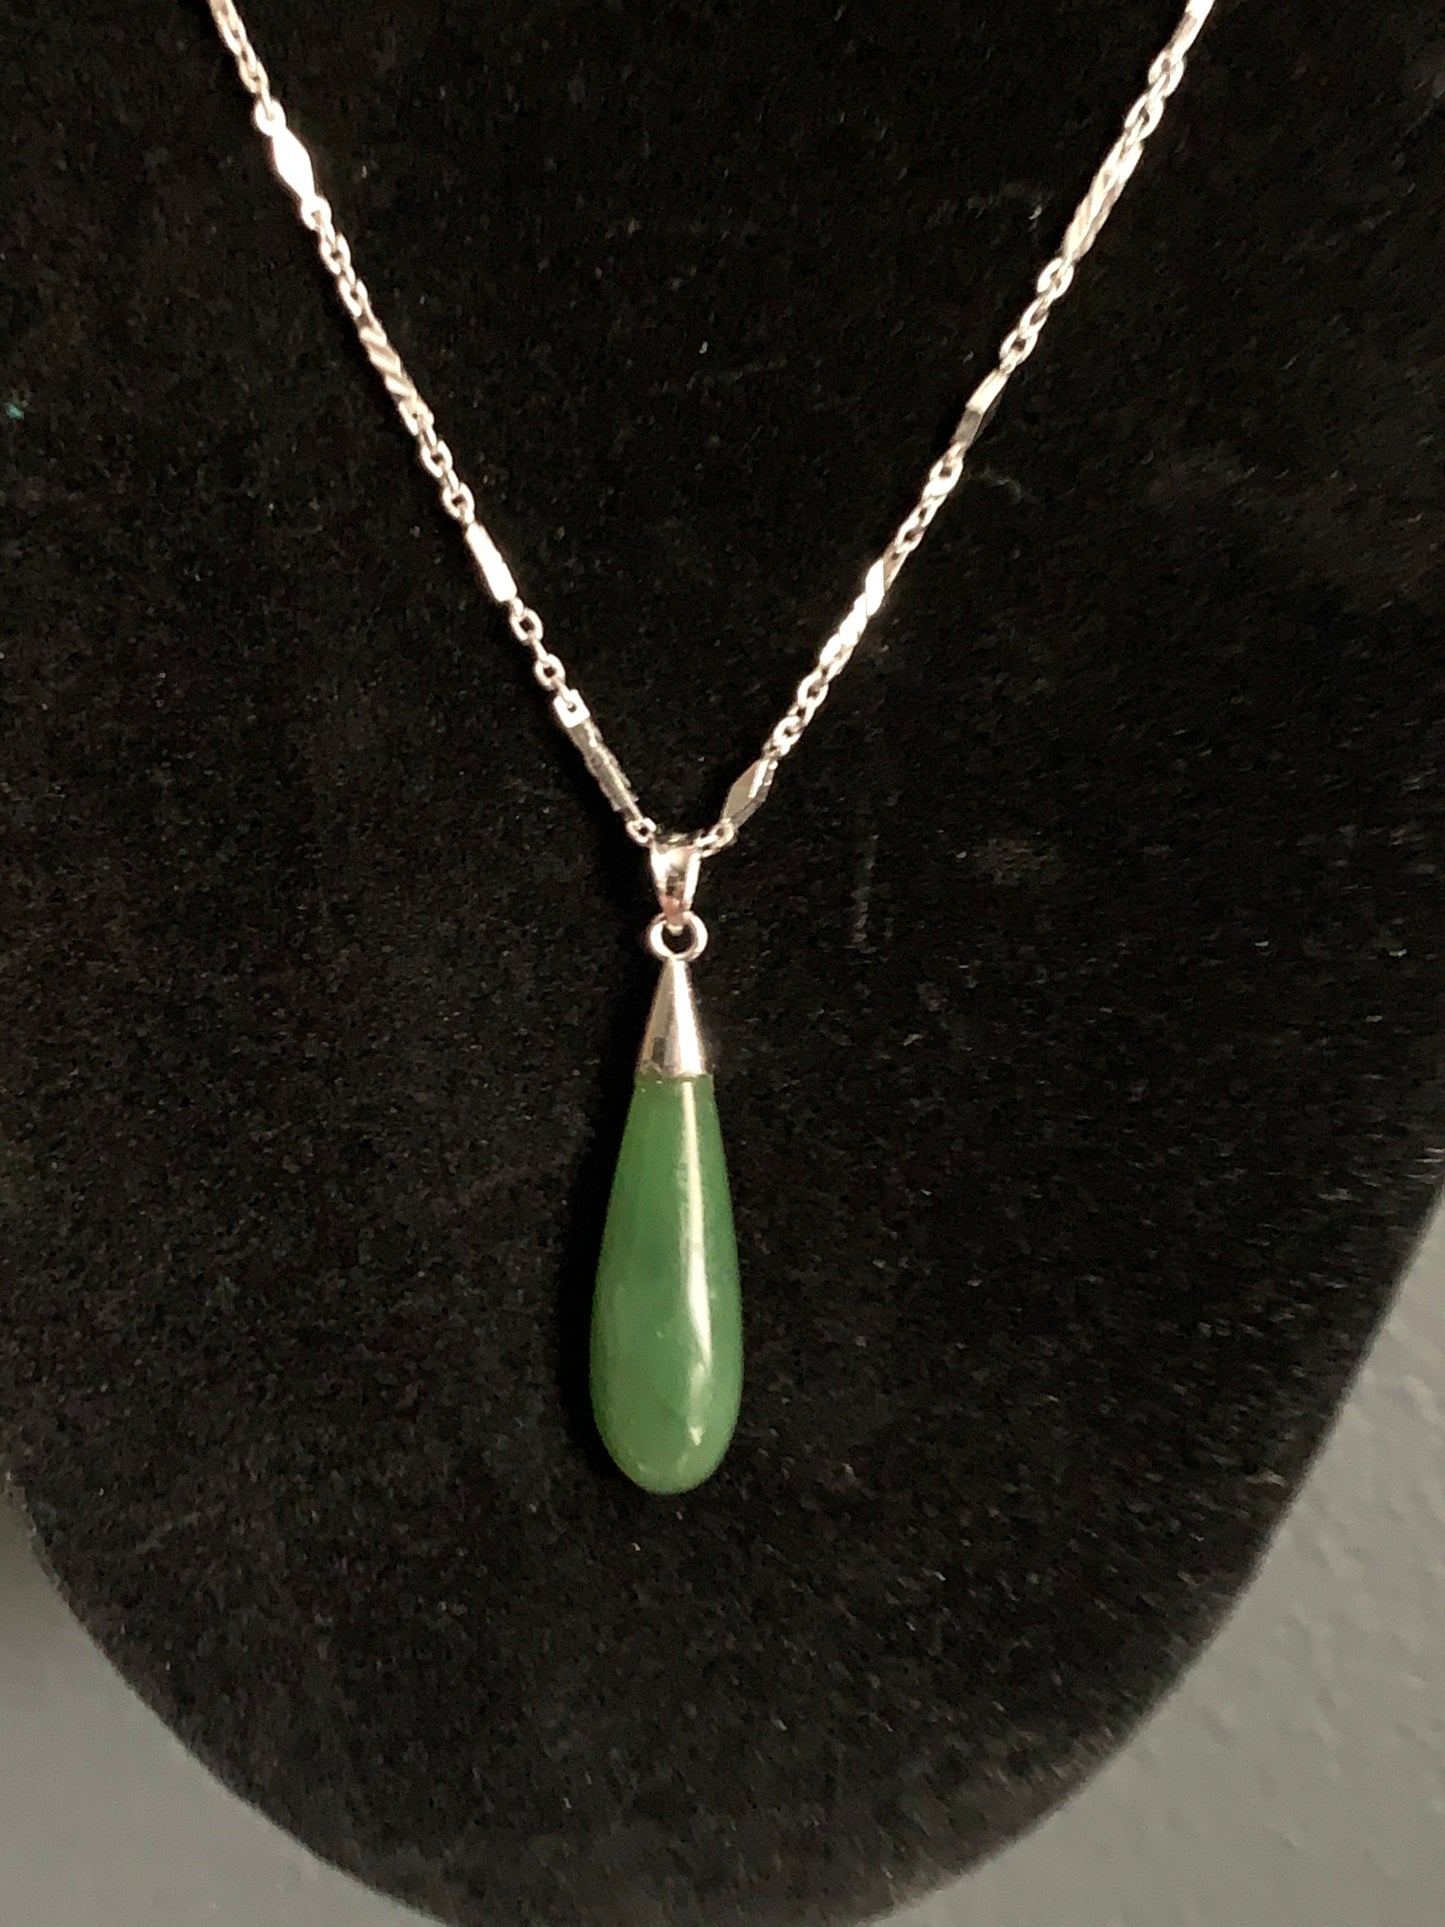 A jade tear drop ear ring and necklace in silver